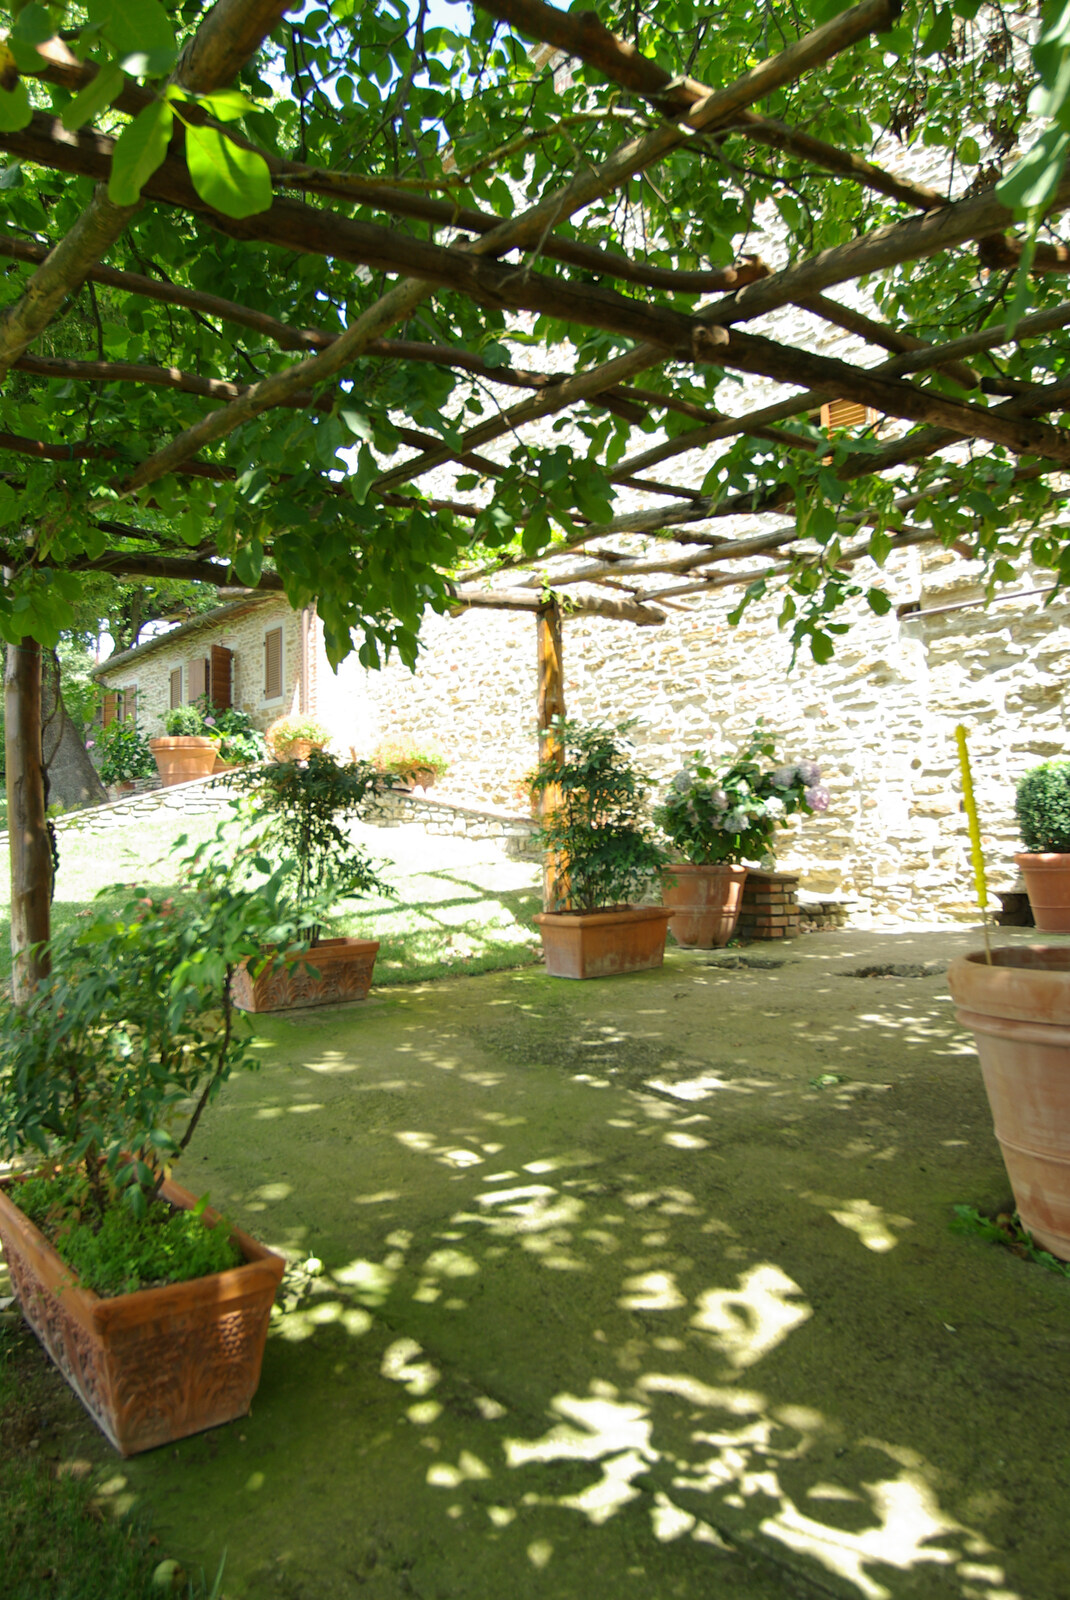 Tenuta Il Palazzo in Arezzo, Tuscany, Italy - 22nd July 2008: Our shaded patio